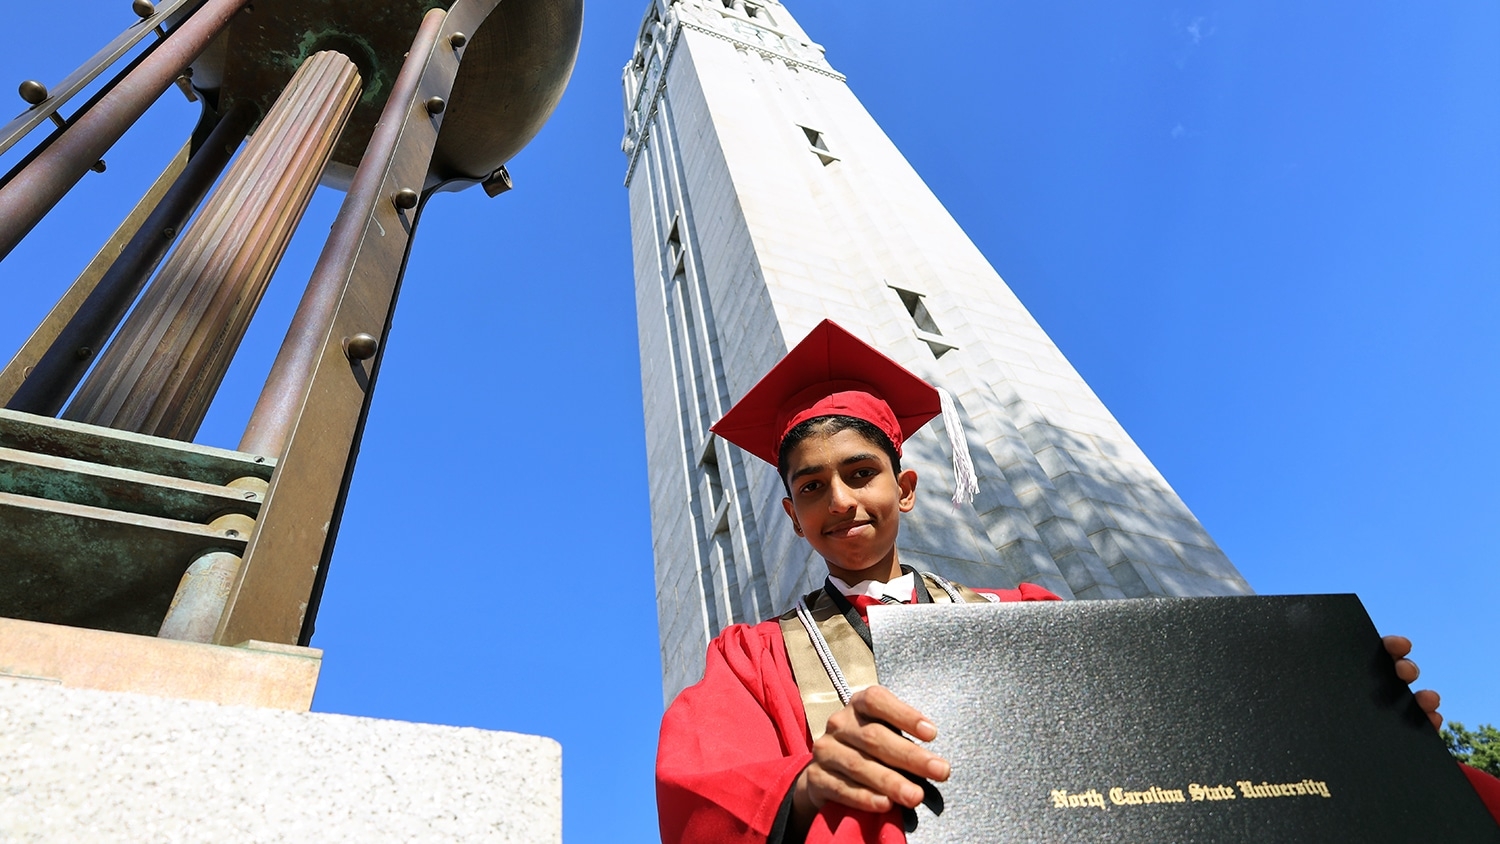 Madhusudan Madhavan holds his diploma at the base of the Belltower.